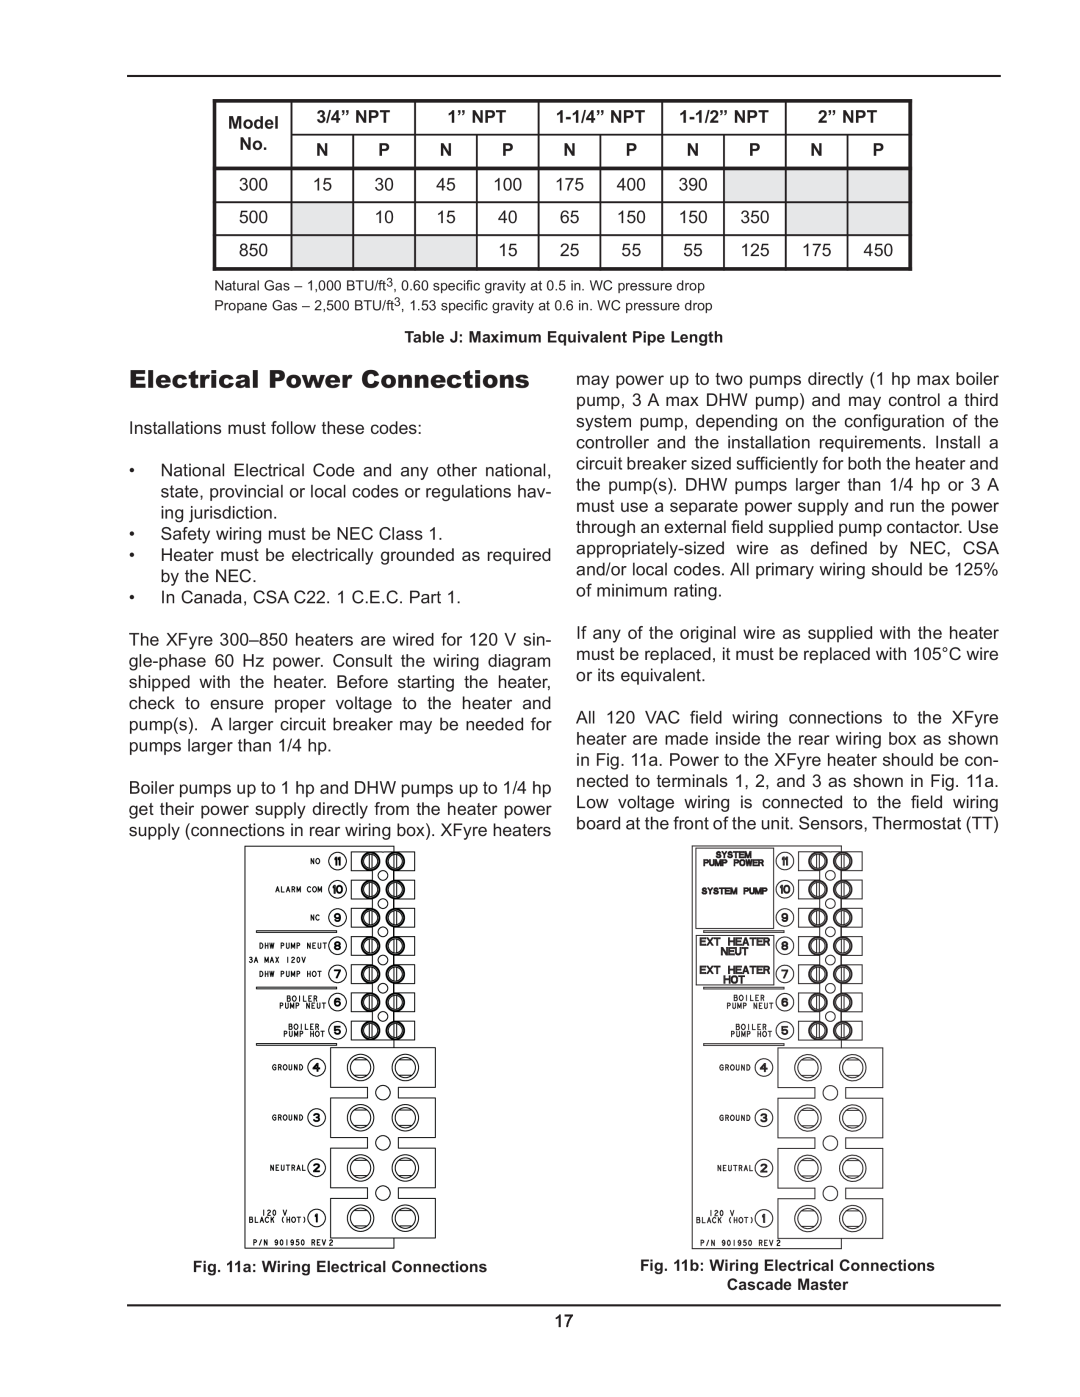 Raypak 300, 850 operating instructions Electrical Power Connections 